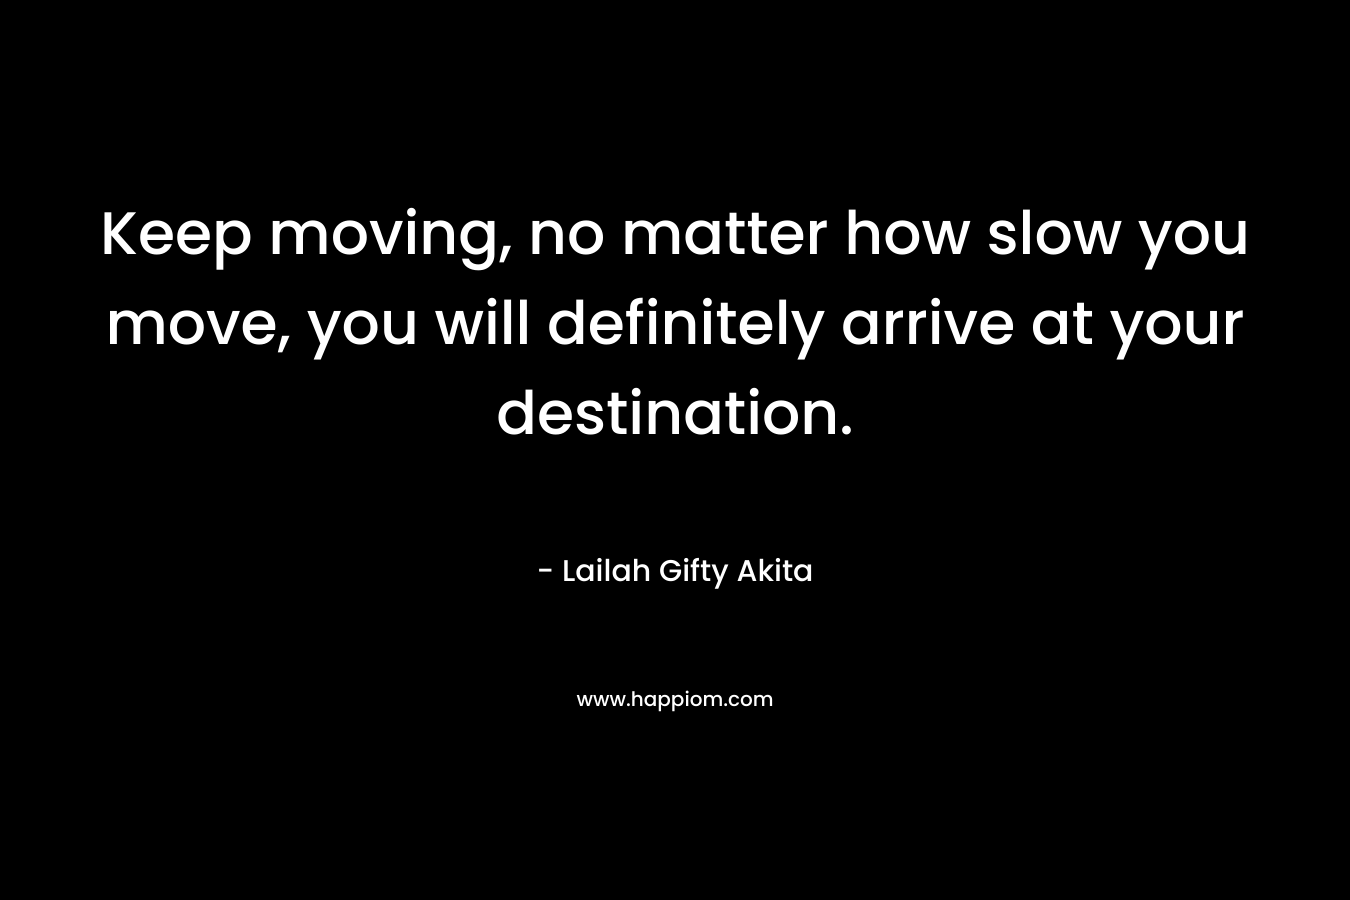 Keep moving, no matter how slow you move, you will definitely arrive at your destination.